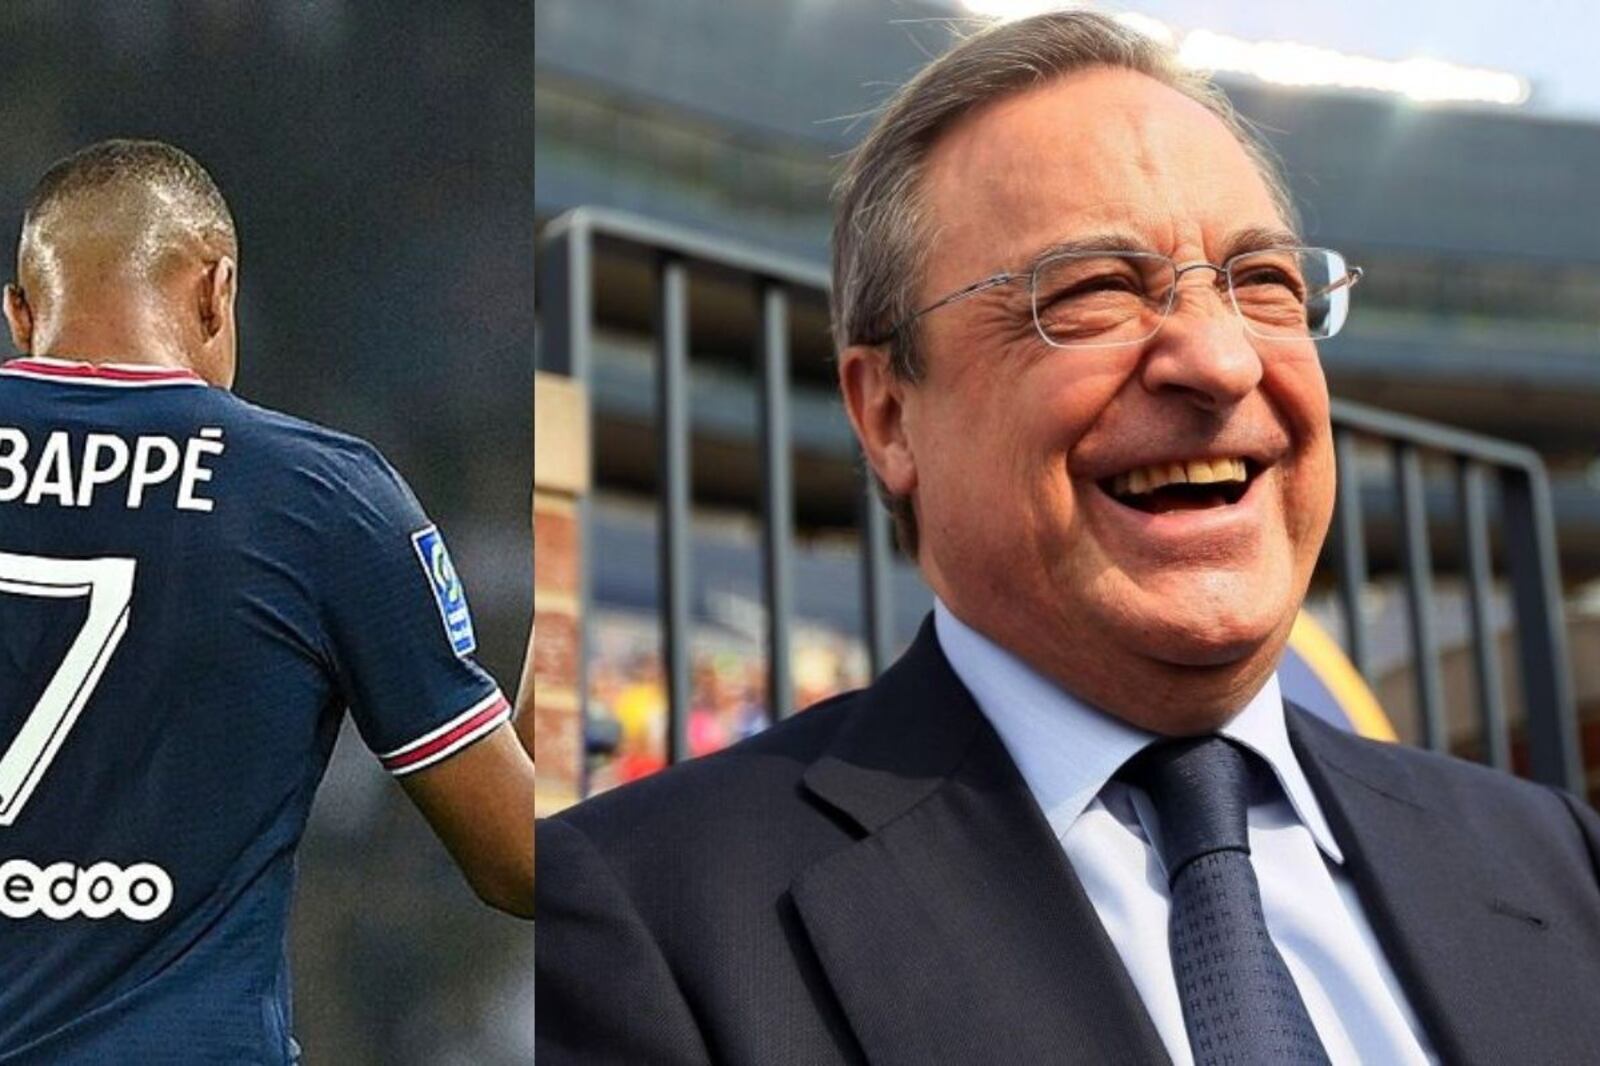 Real Madrid smiles, the controversy that involves Mbappé and distances him from PSG